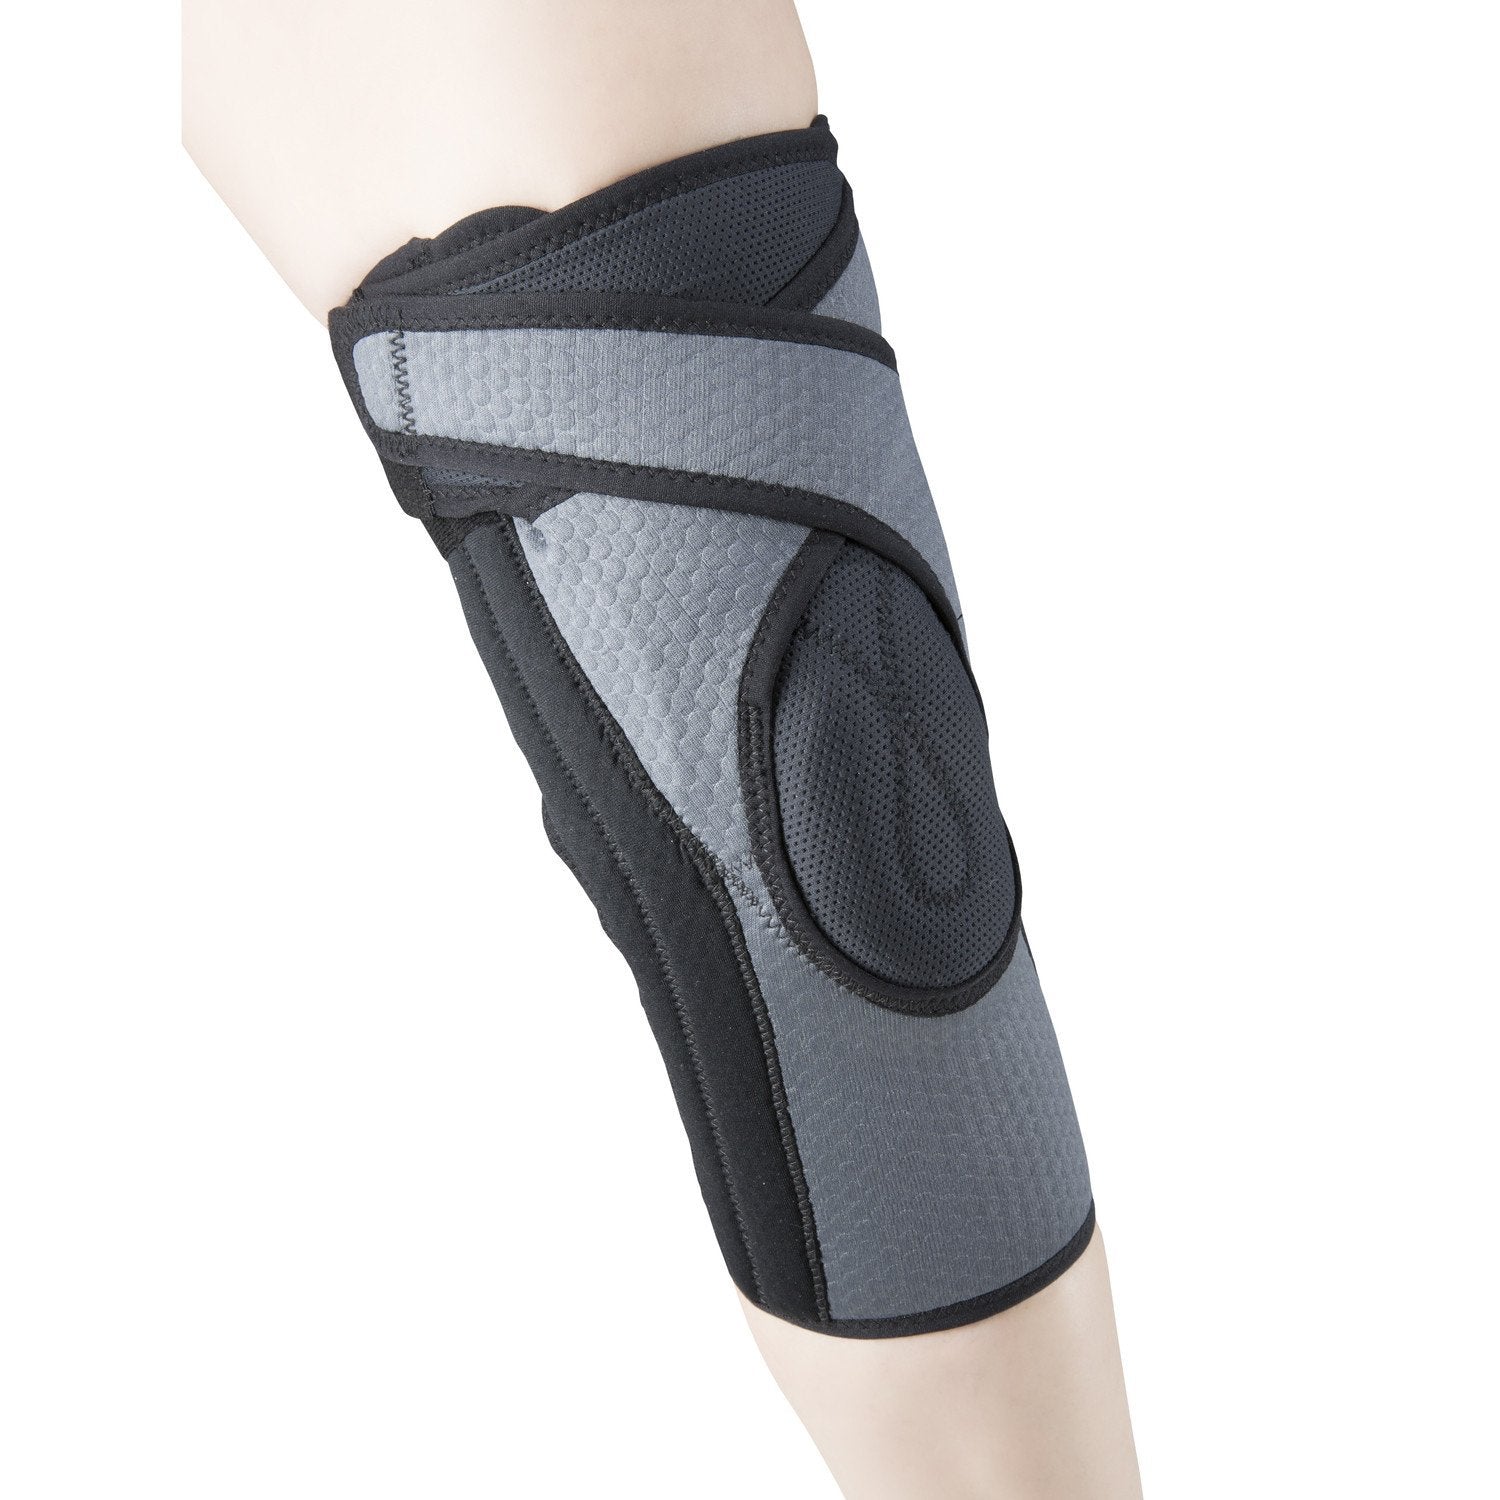 AIR 2550-XL EA/1 KNEE SUPPORT WITH PATELLA UPLIFT, GREY, X-LARGE